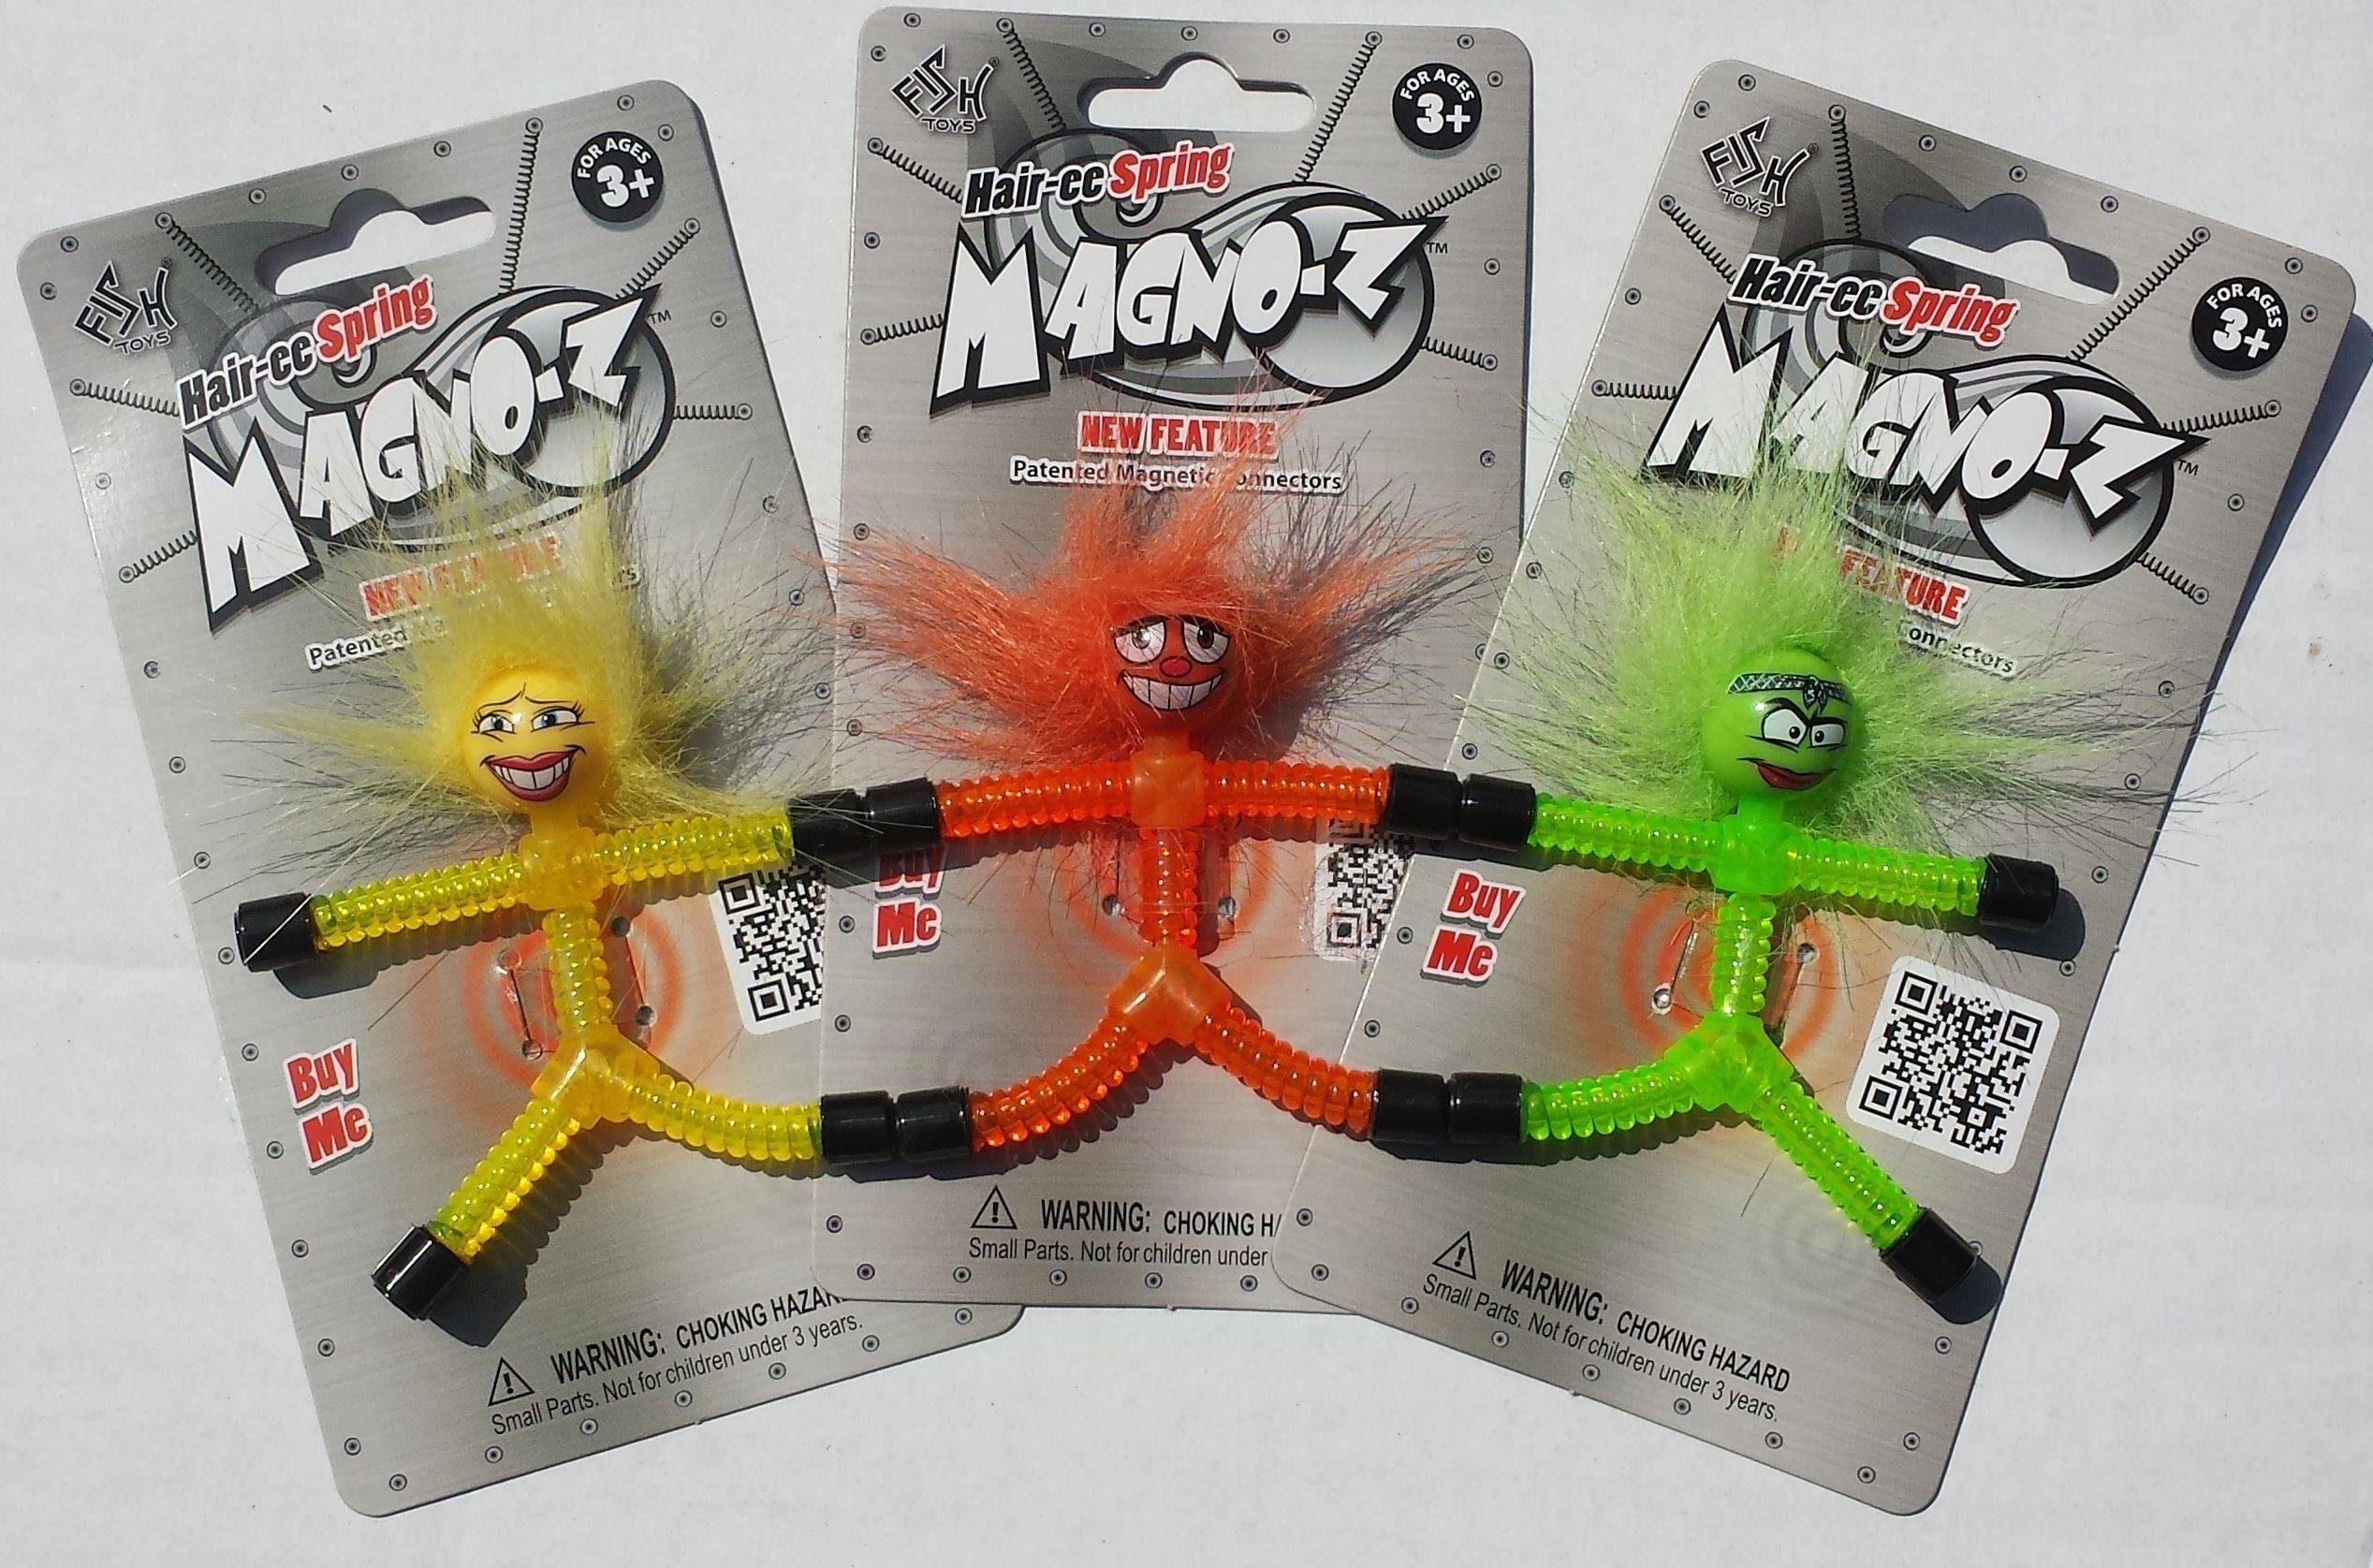 Magno-Z 3 Pack Hairee Spring